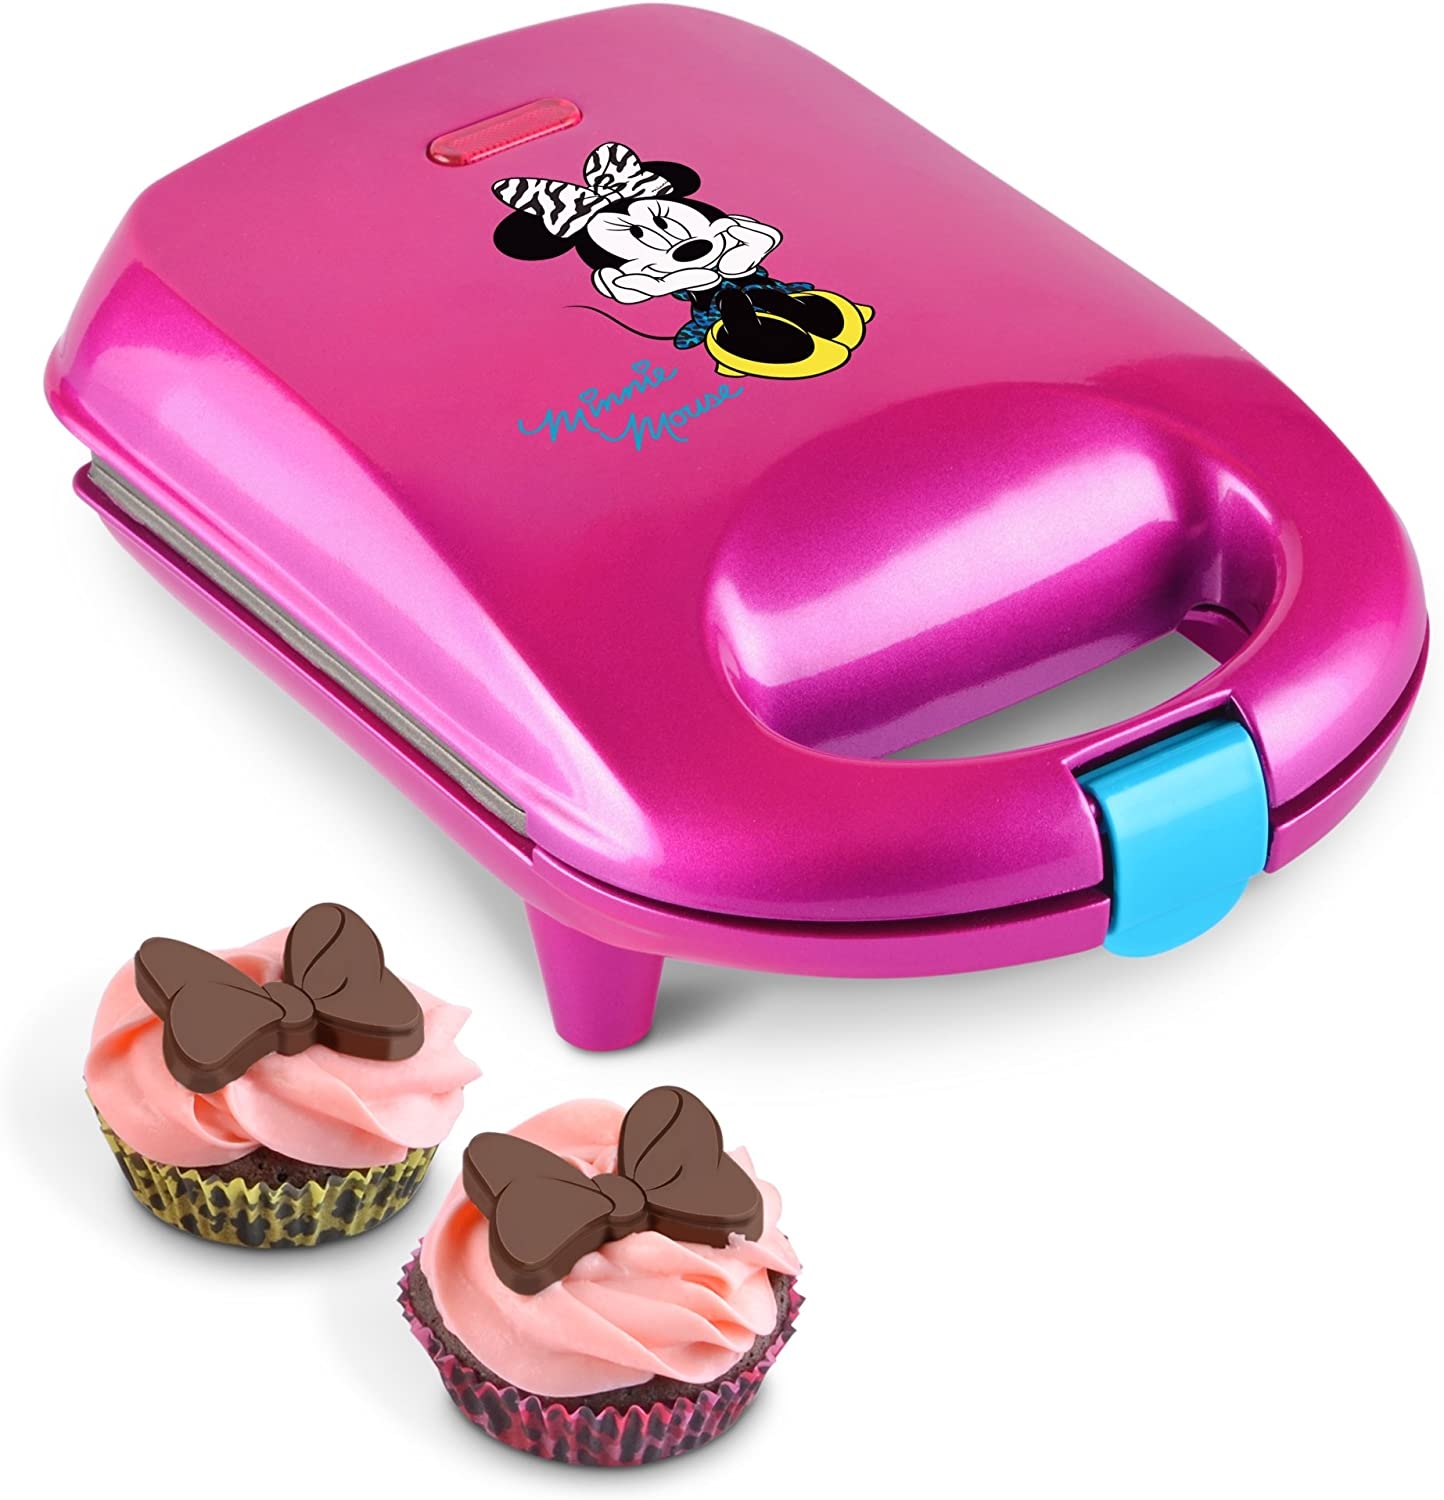 Disney DMG-7 Minnie Mouse Cupcake Maker, Mini, Pink Import To Shop ×Product customization General Description Gallery Reviews